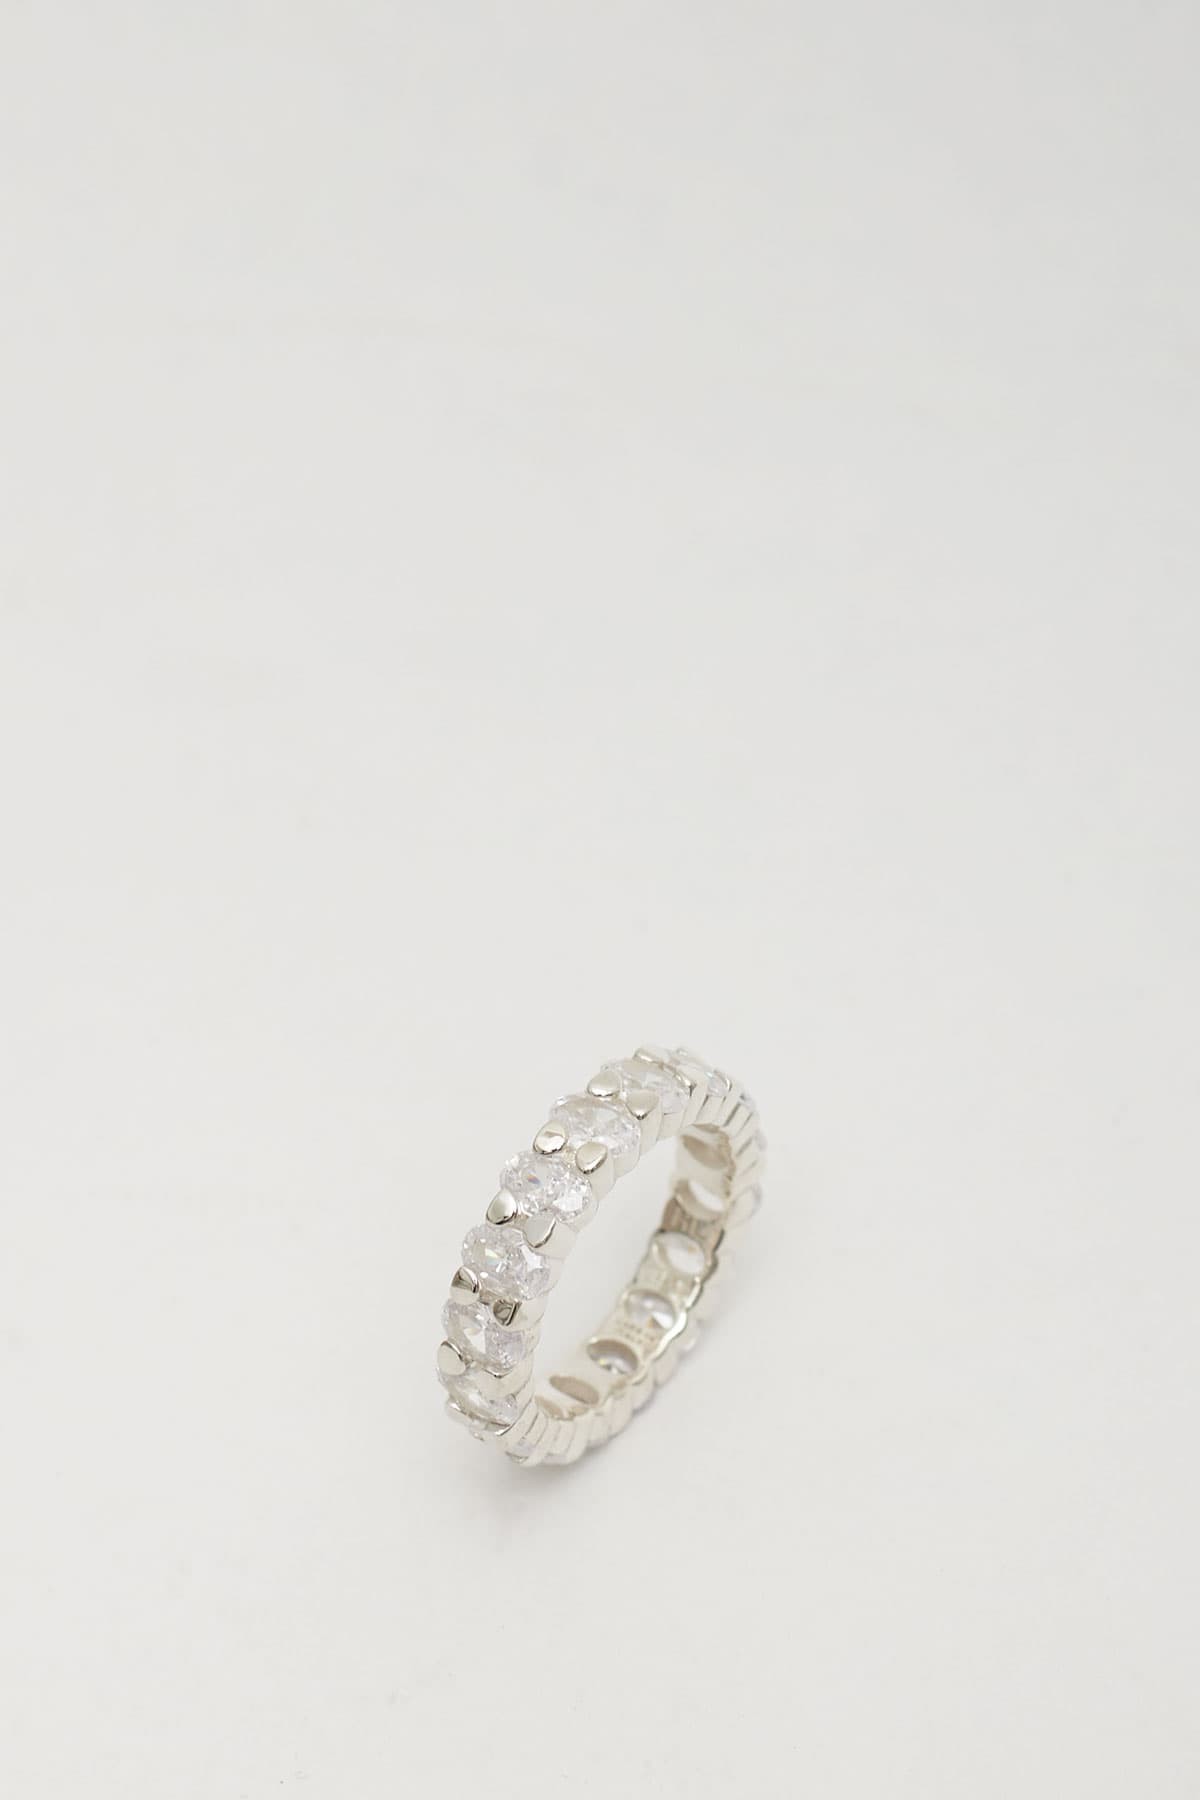 HATTON LABS STERLING SILVER WHITE OVAL ETERNITY RING IAMNUE